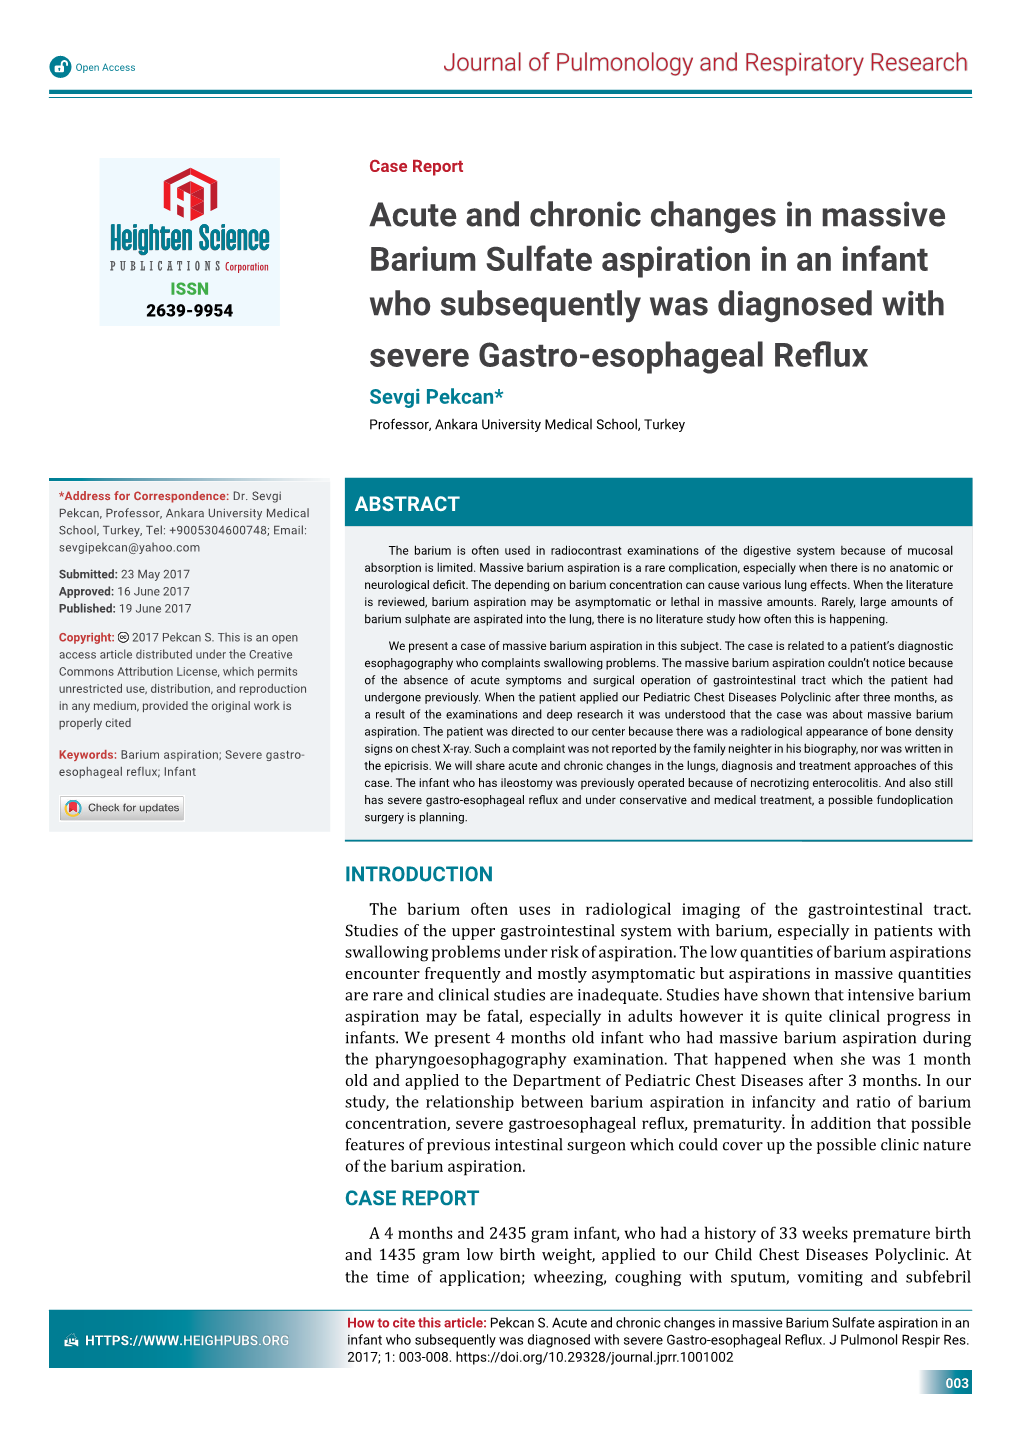 Acute and Chronic Changes in Massive Barium Sulfate Aspiration in An